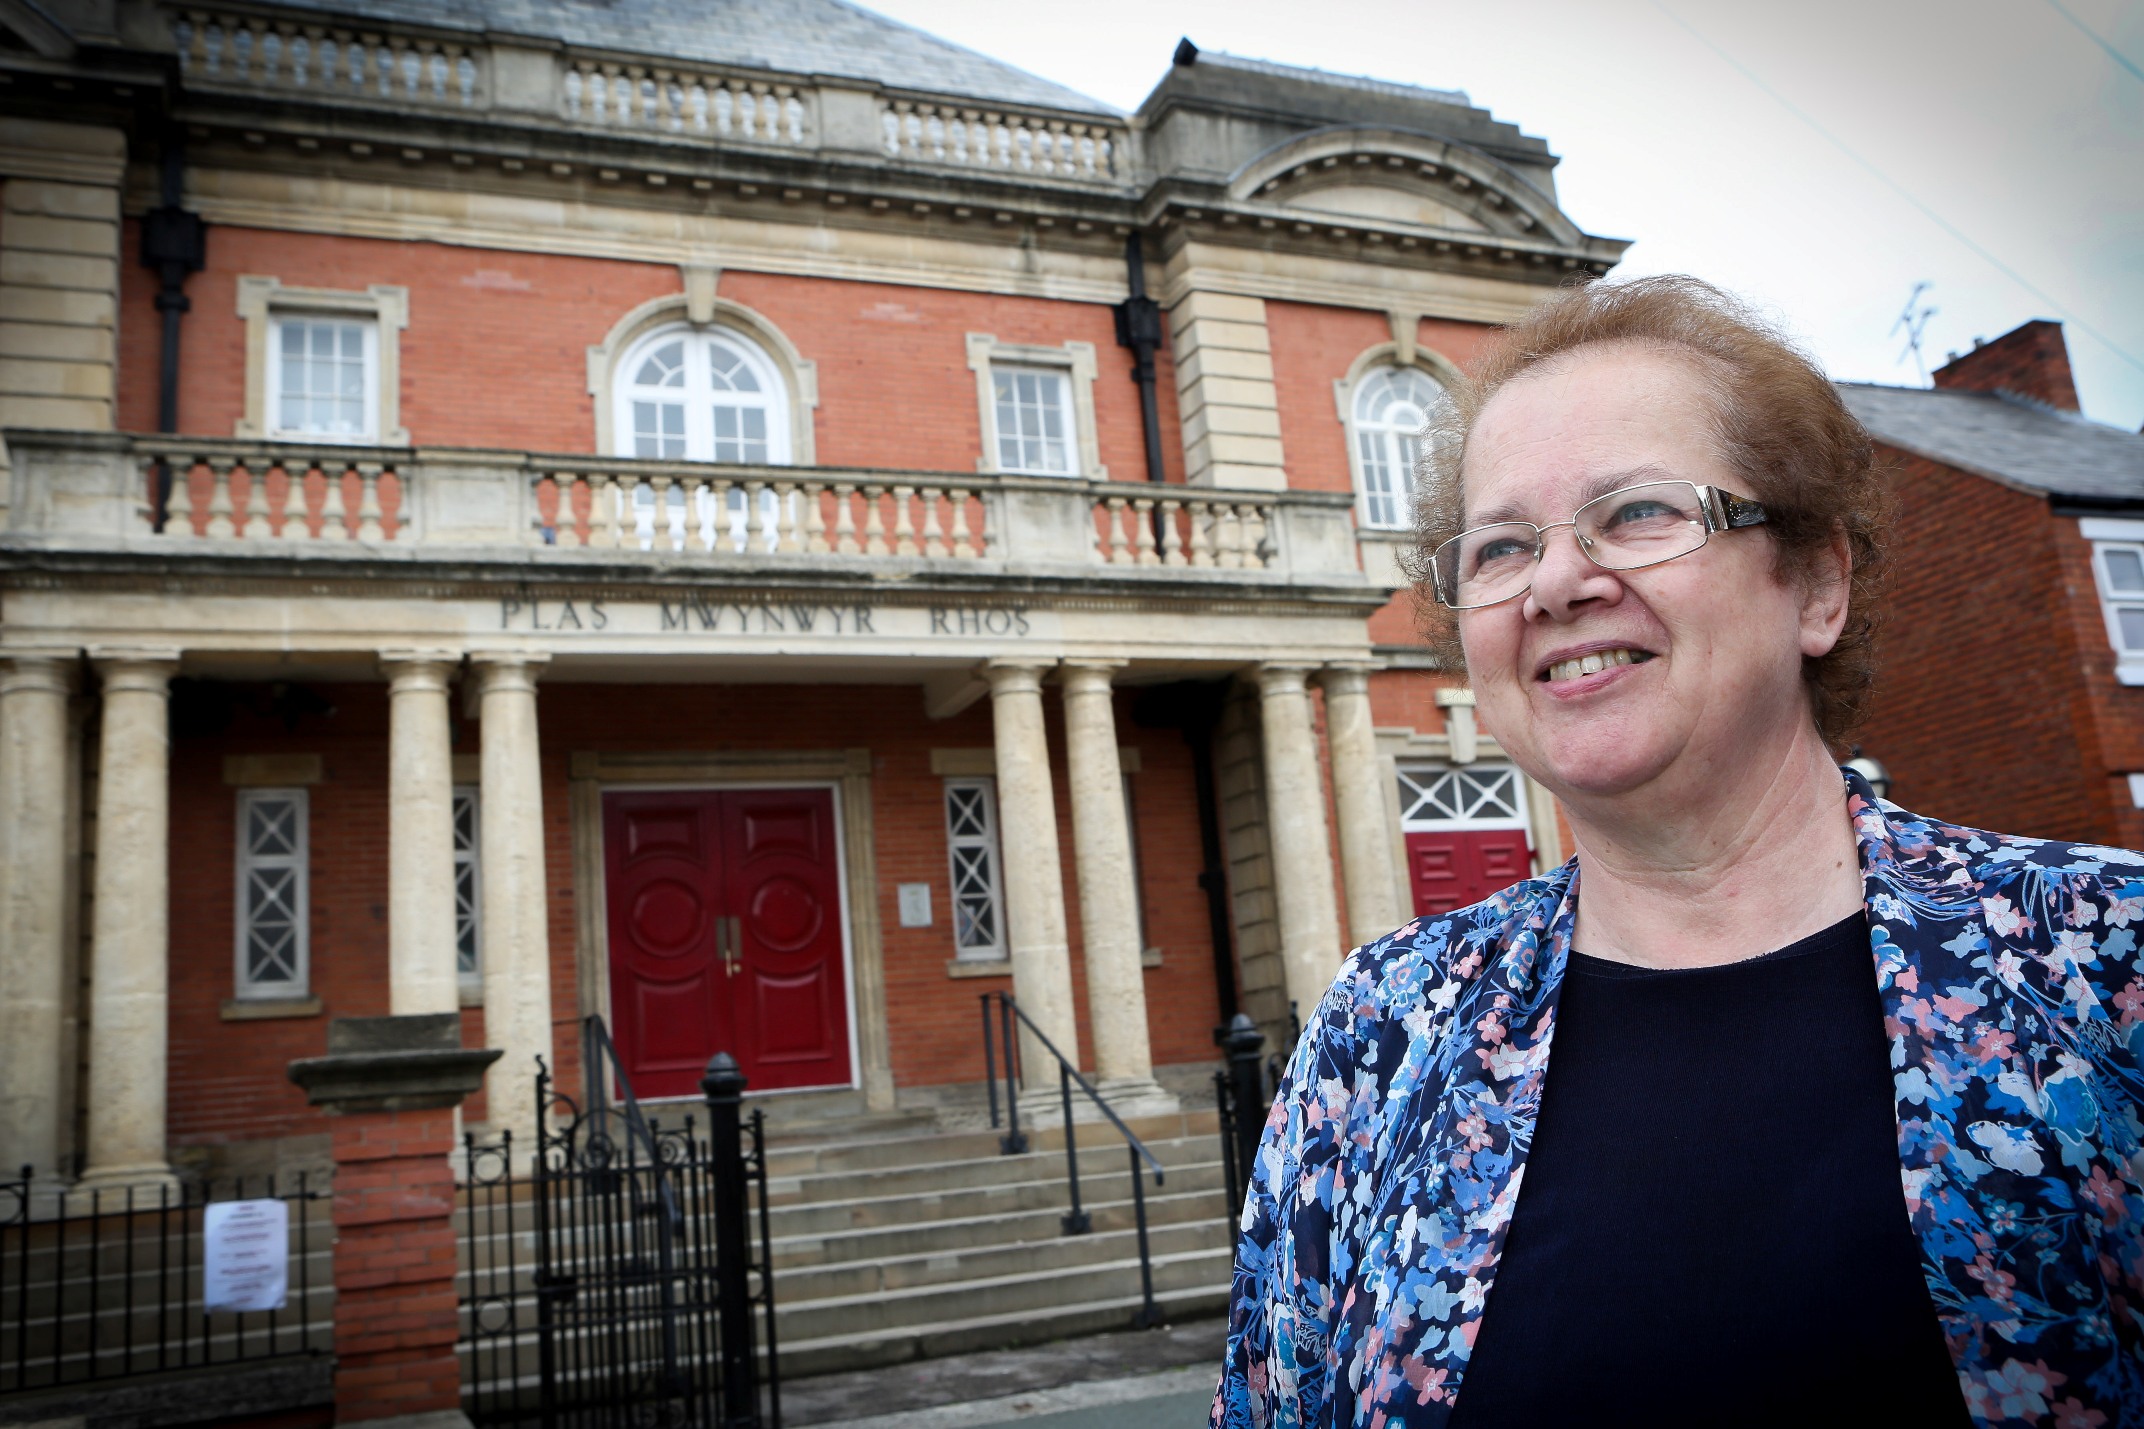 Council throws £150K financial lifeline to historic theatre